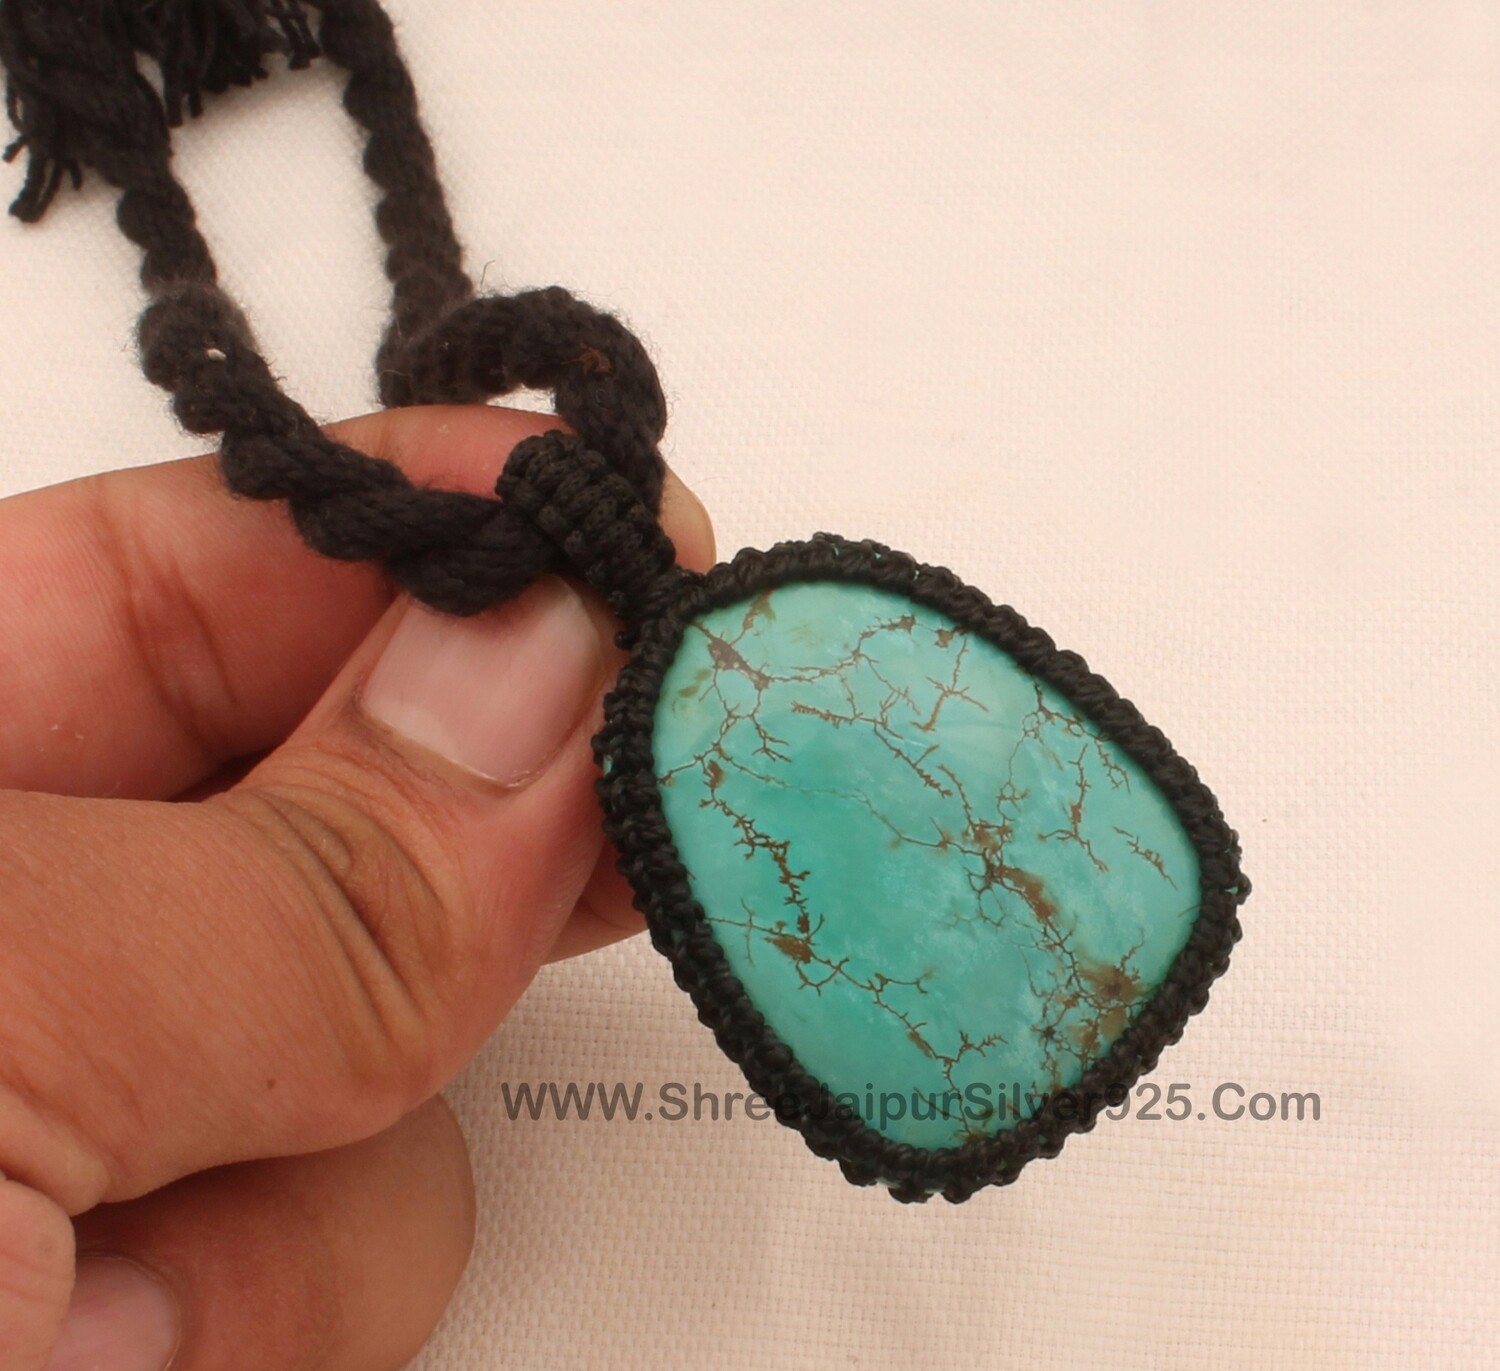 Tibetan Turquoise Macrame Pendant Necklace Gifts For Her, Handmade Gemstone Macrame Jewelry Gifts Idea, Black Thread Stone Bohemian Necklace